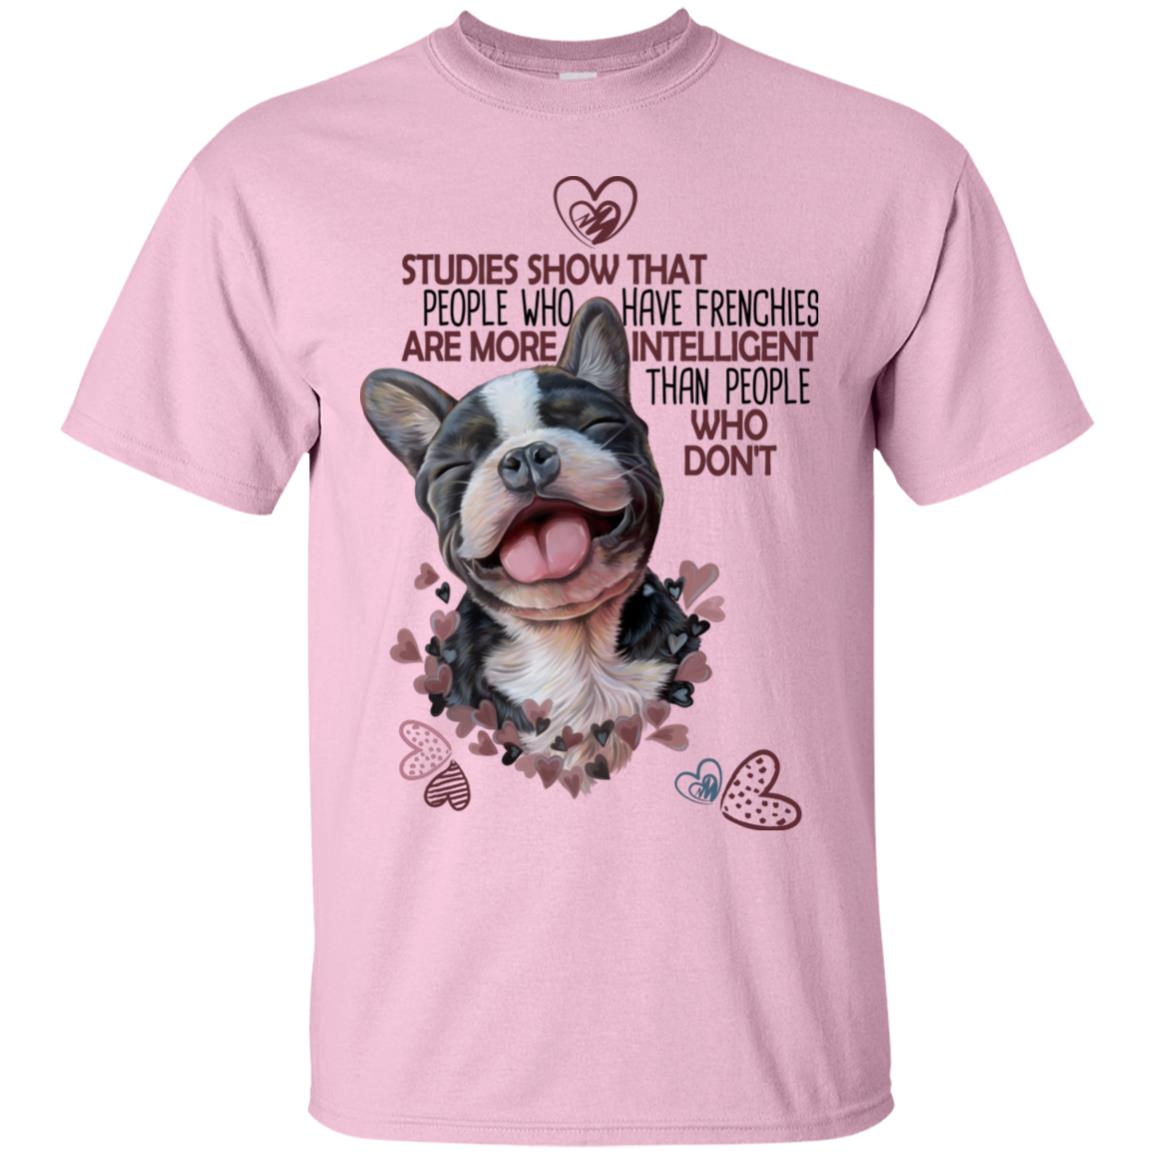 French bulldog Funny T-Shirt - People Who Have Frenchies - GoneBold.gift